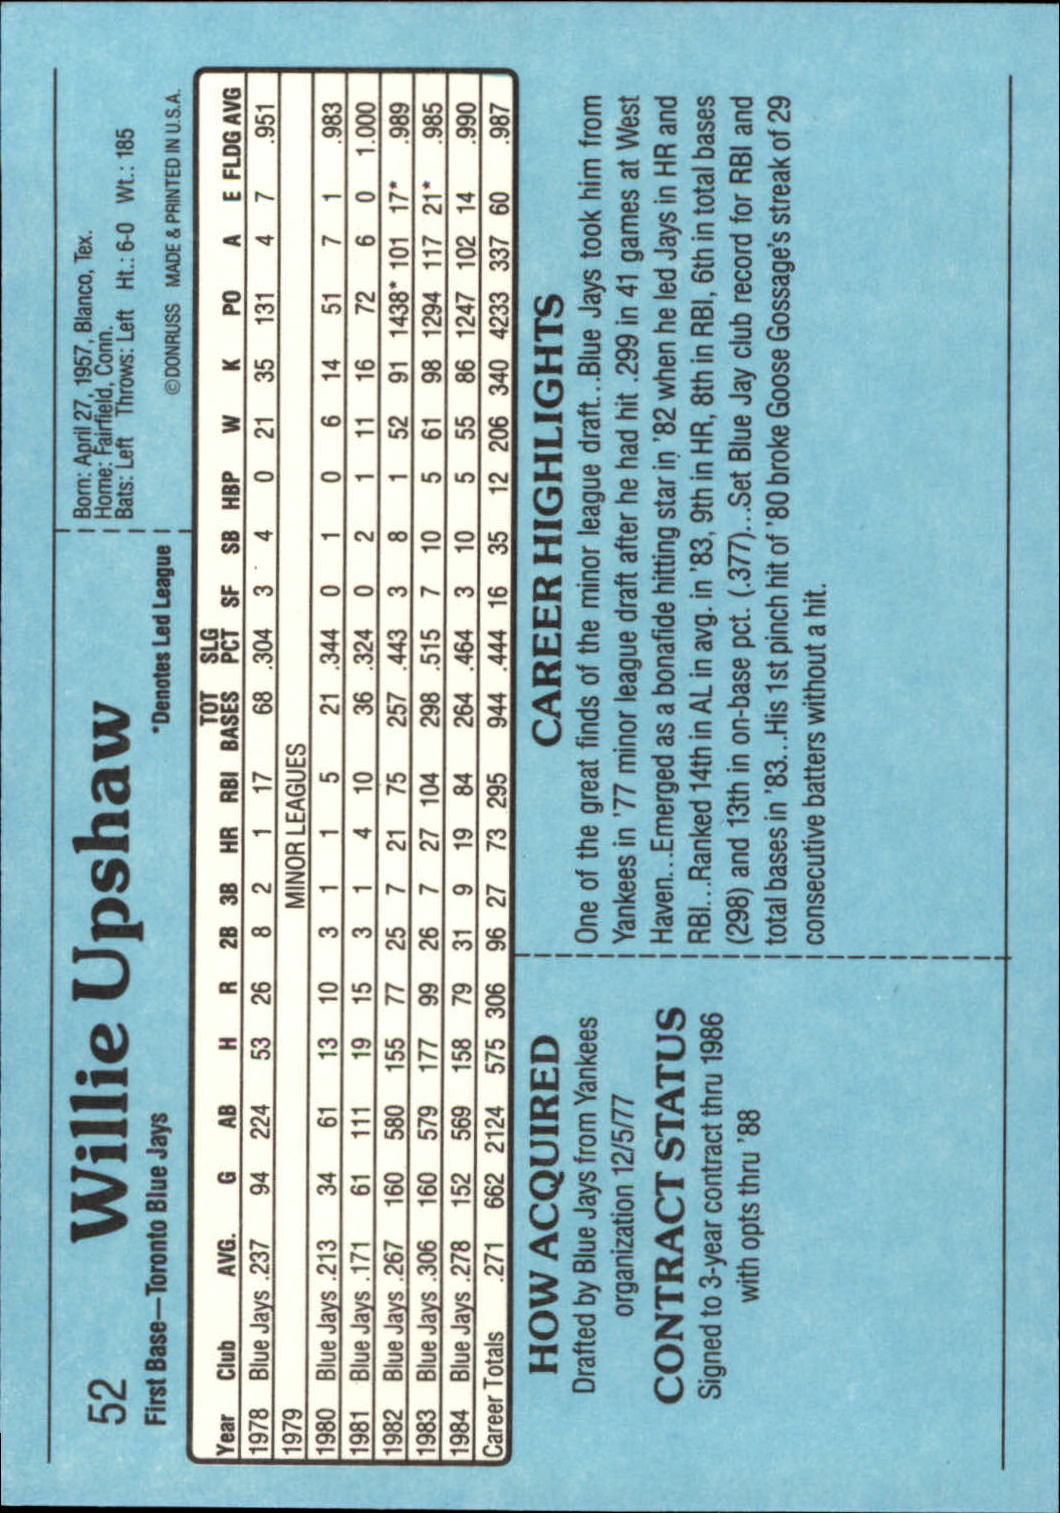 1985 Donruss Action All-Stars #52 Willie Upshaw back image